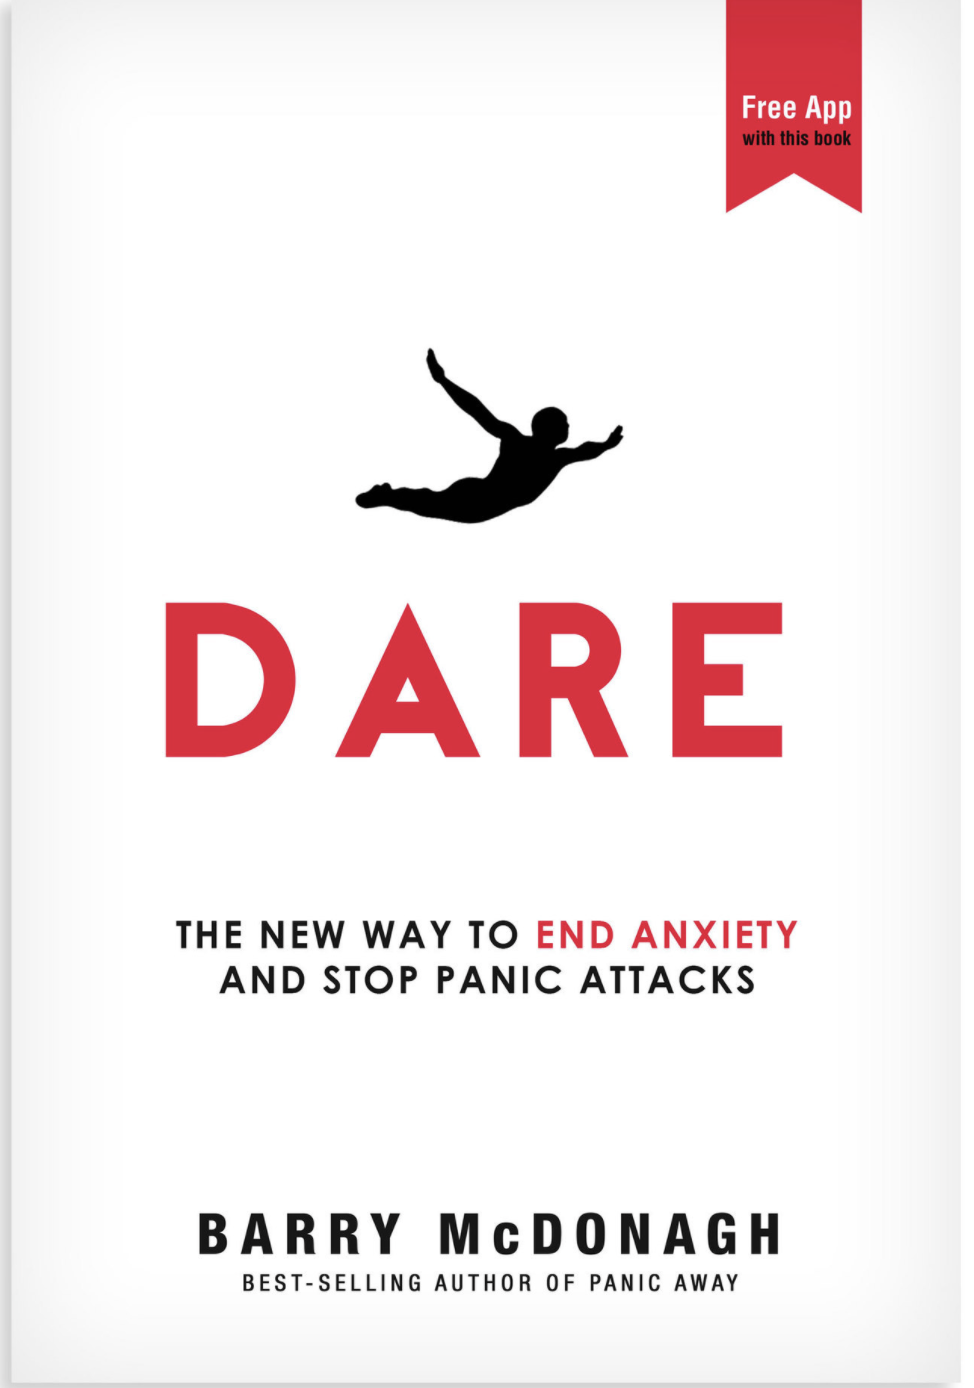 DARE THe new way tto End ANxiety & Stop Panic Attacks